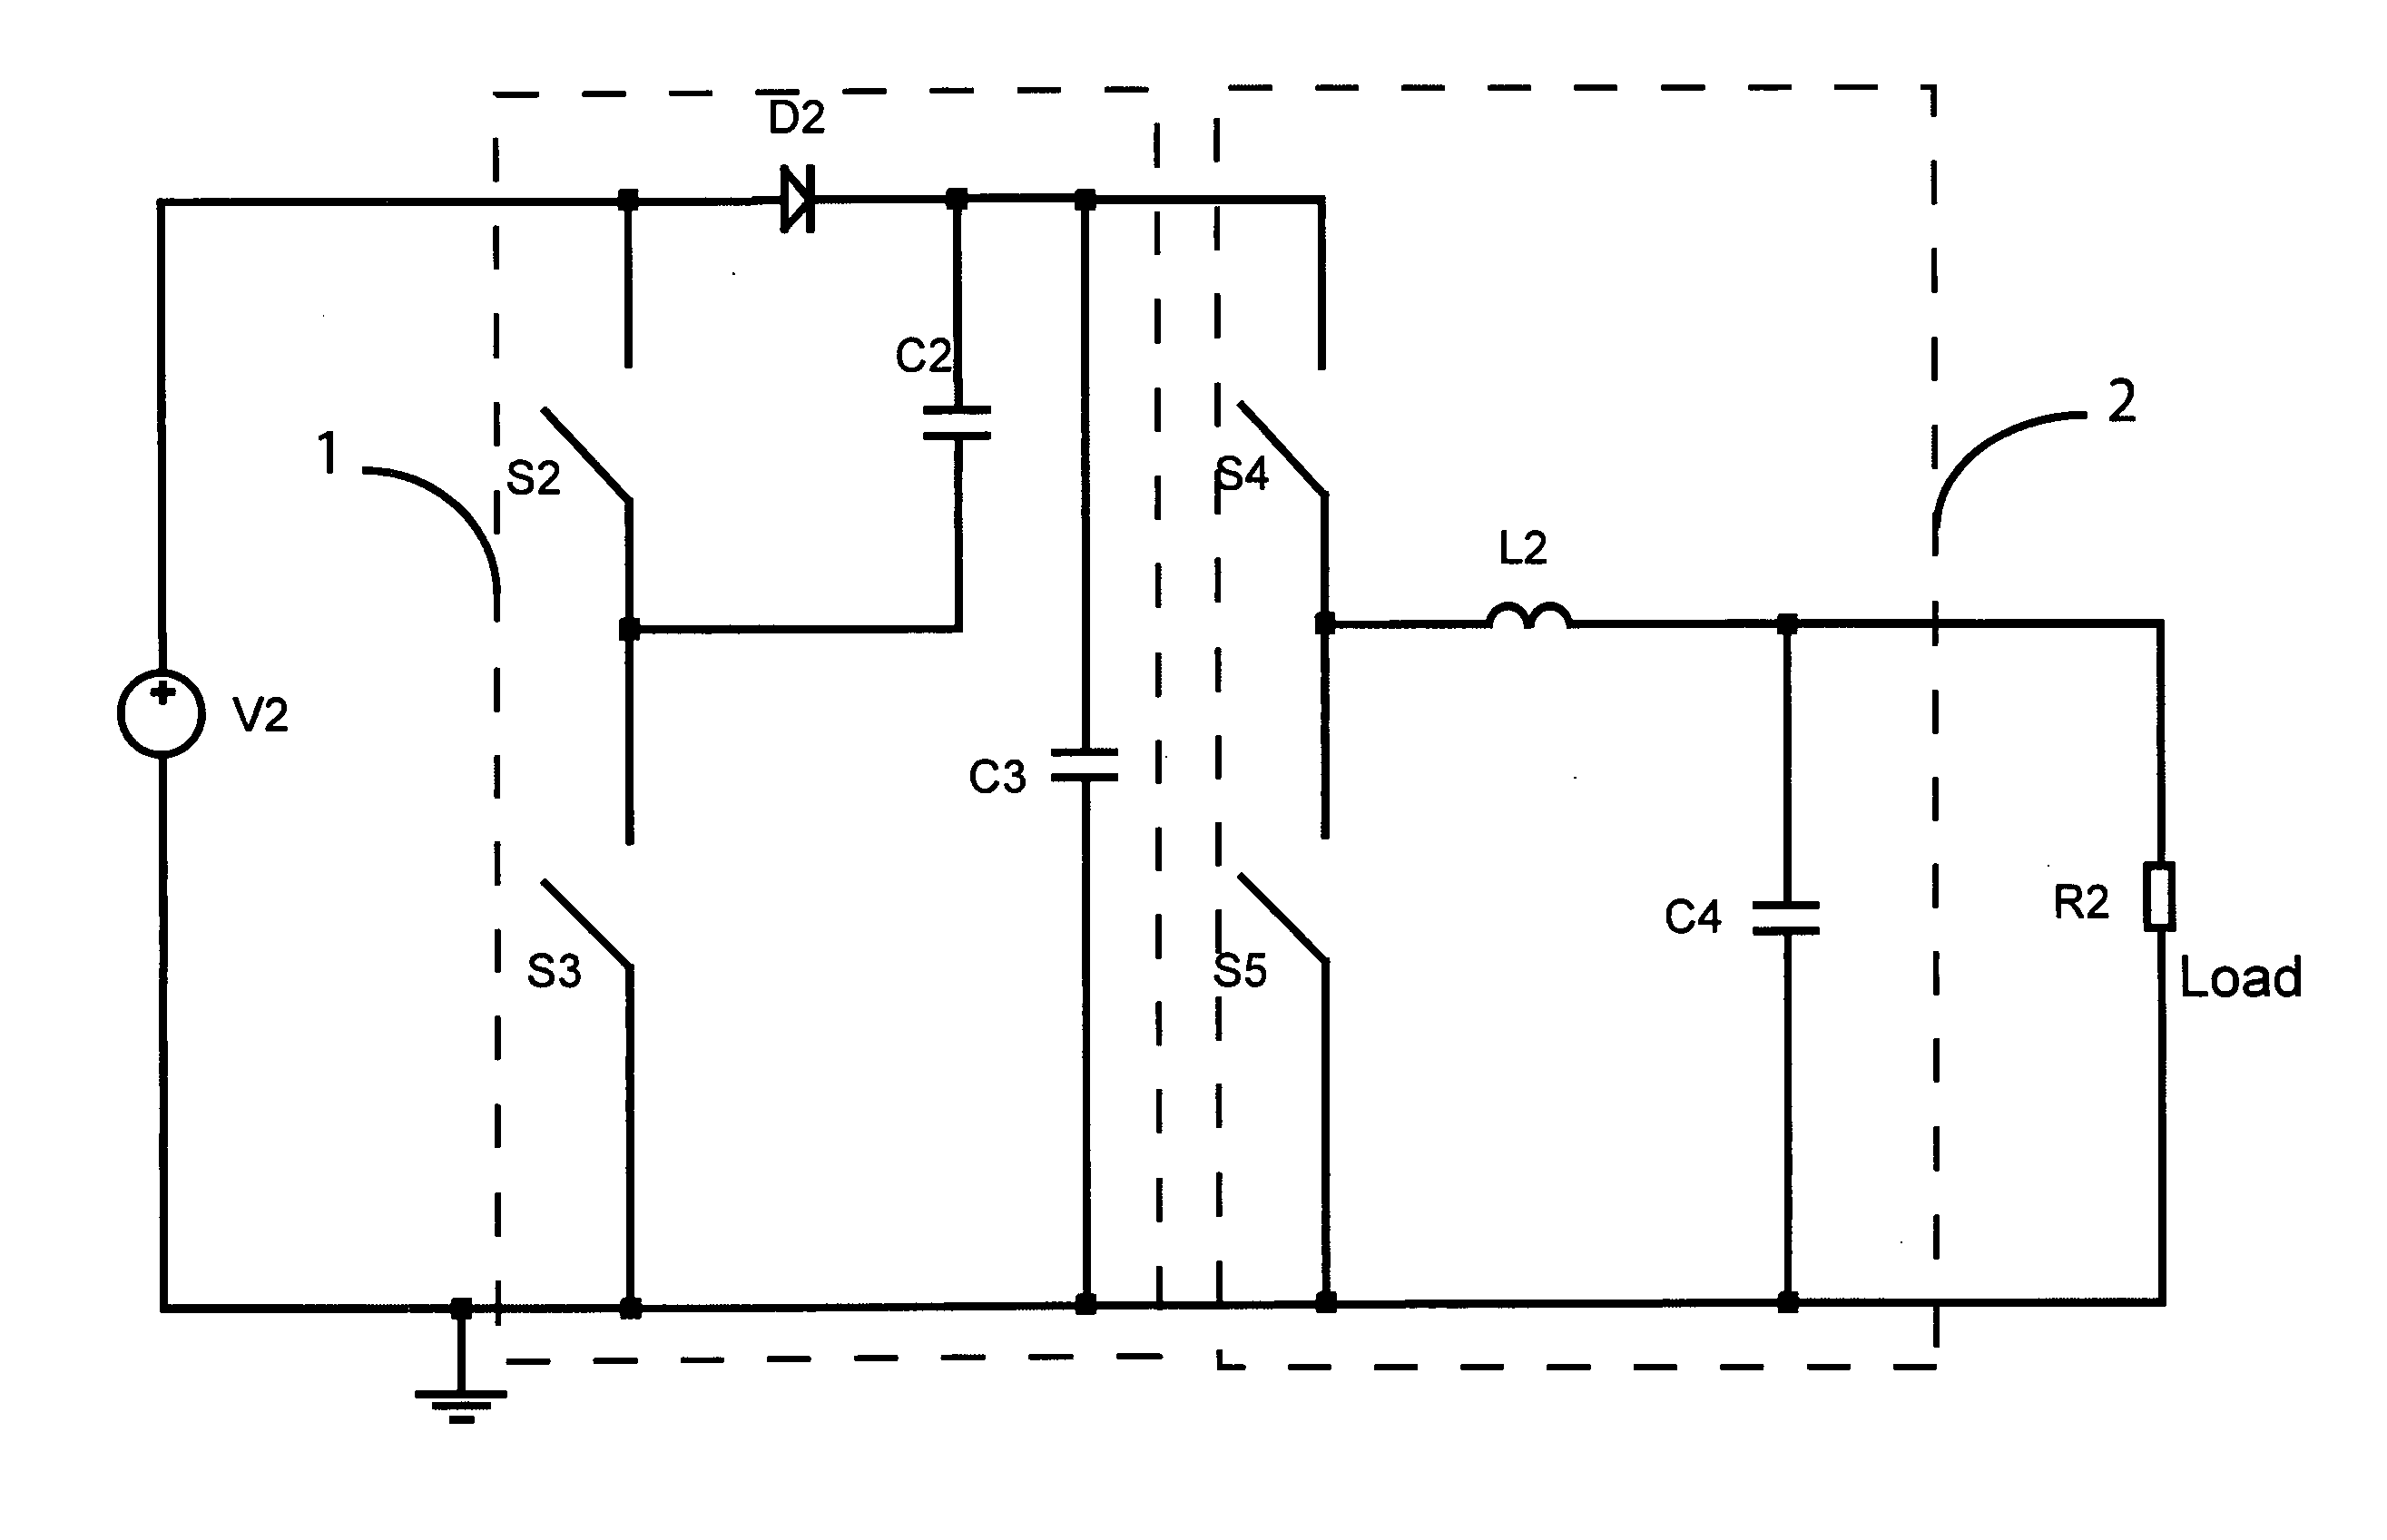 Hysteretic CL power converter